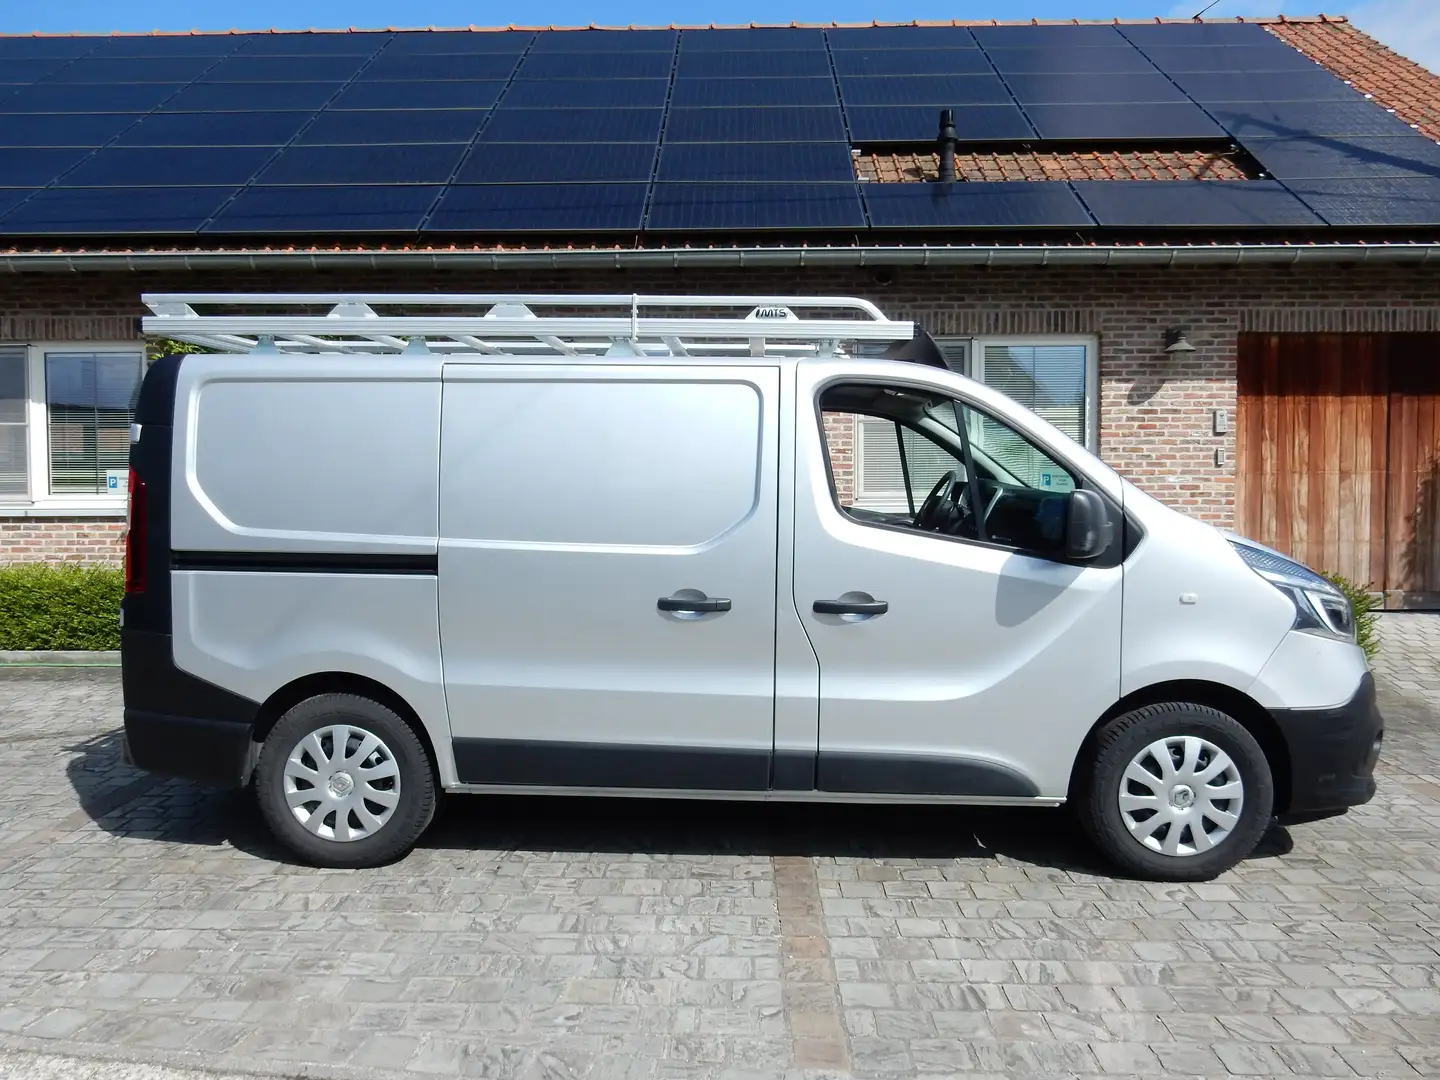 Renault Trafic 1.6dci LED bagagerek (13500Netto+Btw/Tva) Argent - 1